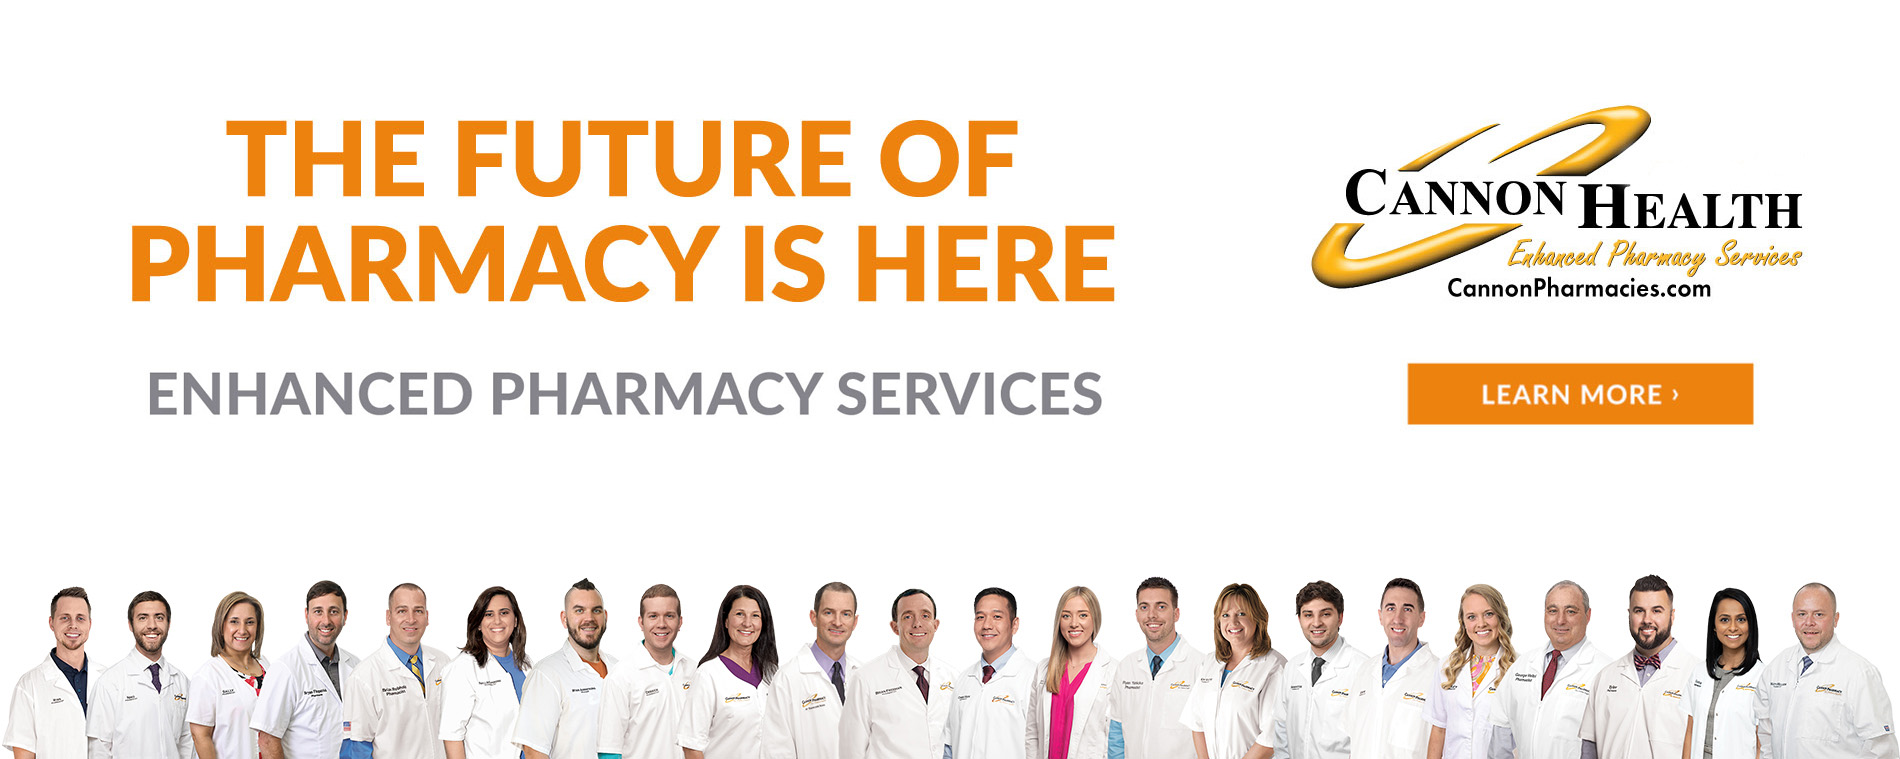 The future of pharmacy is here